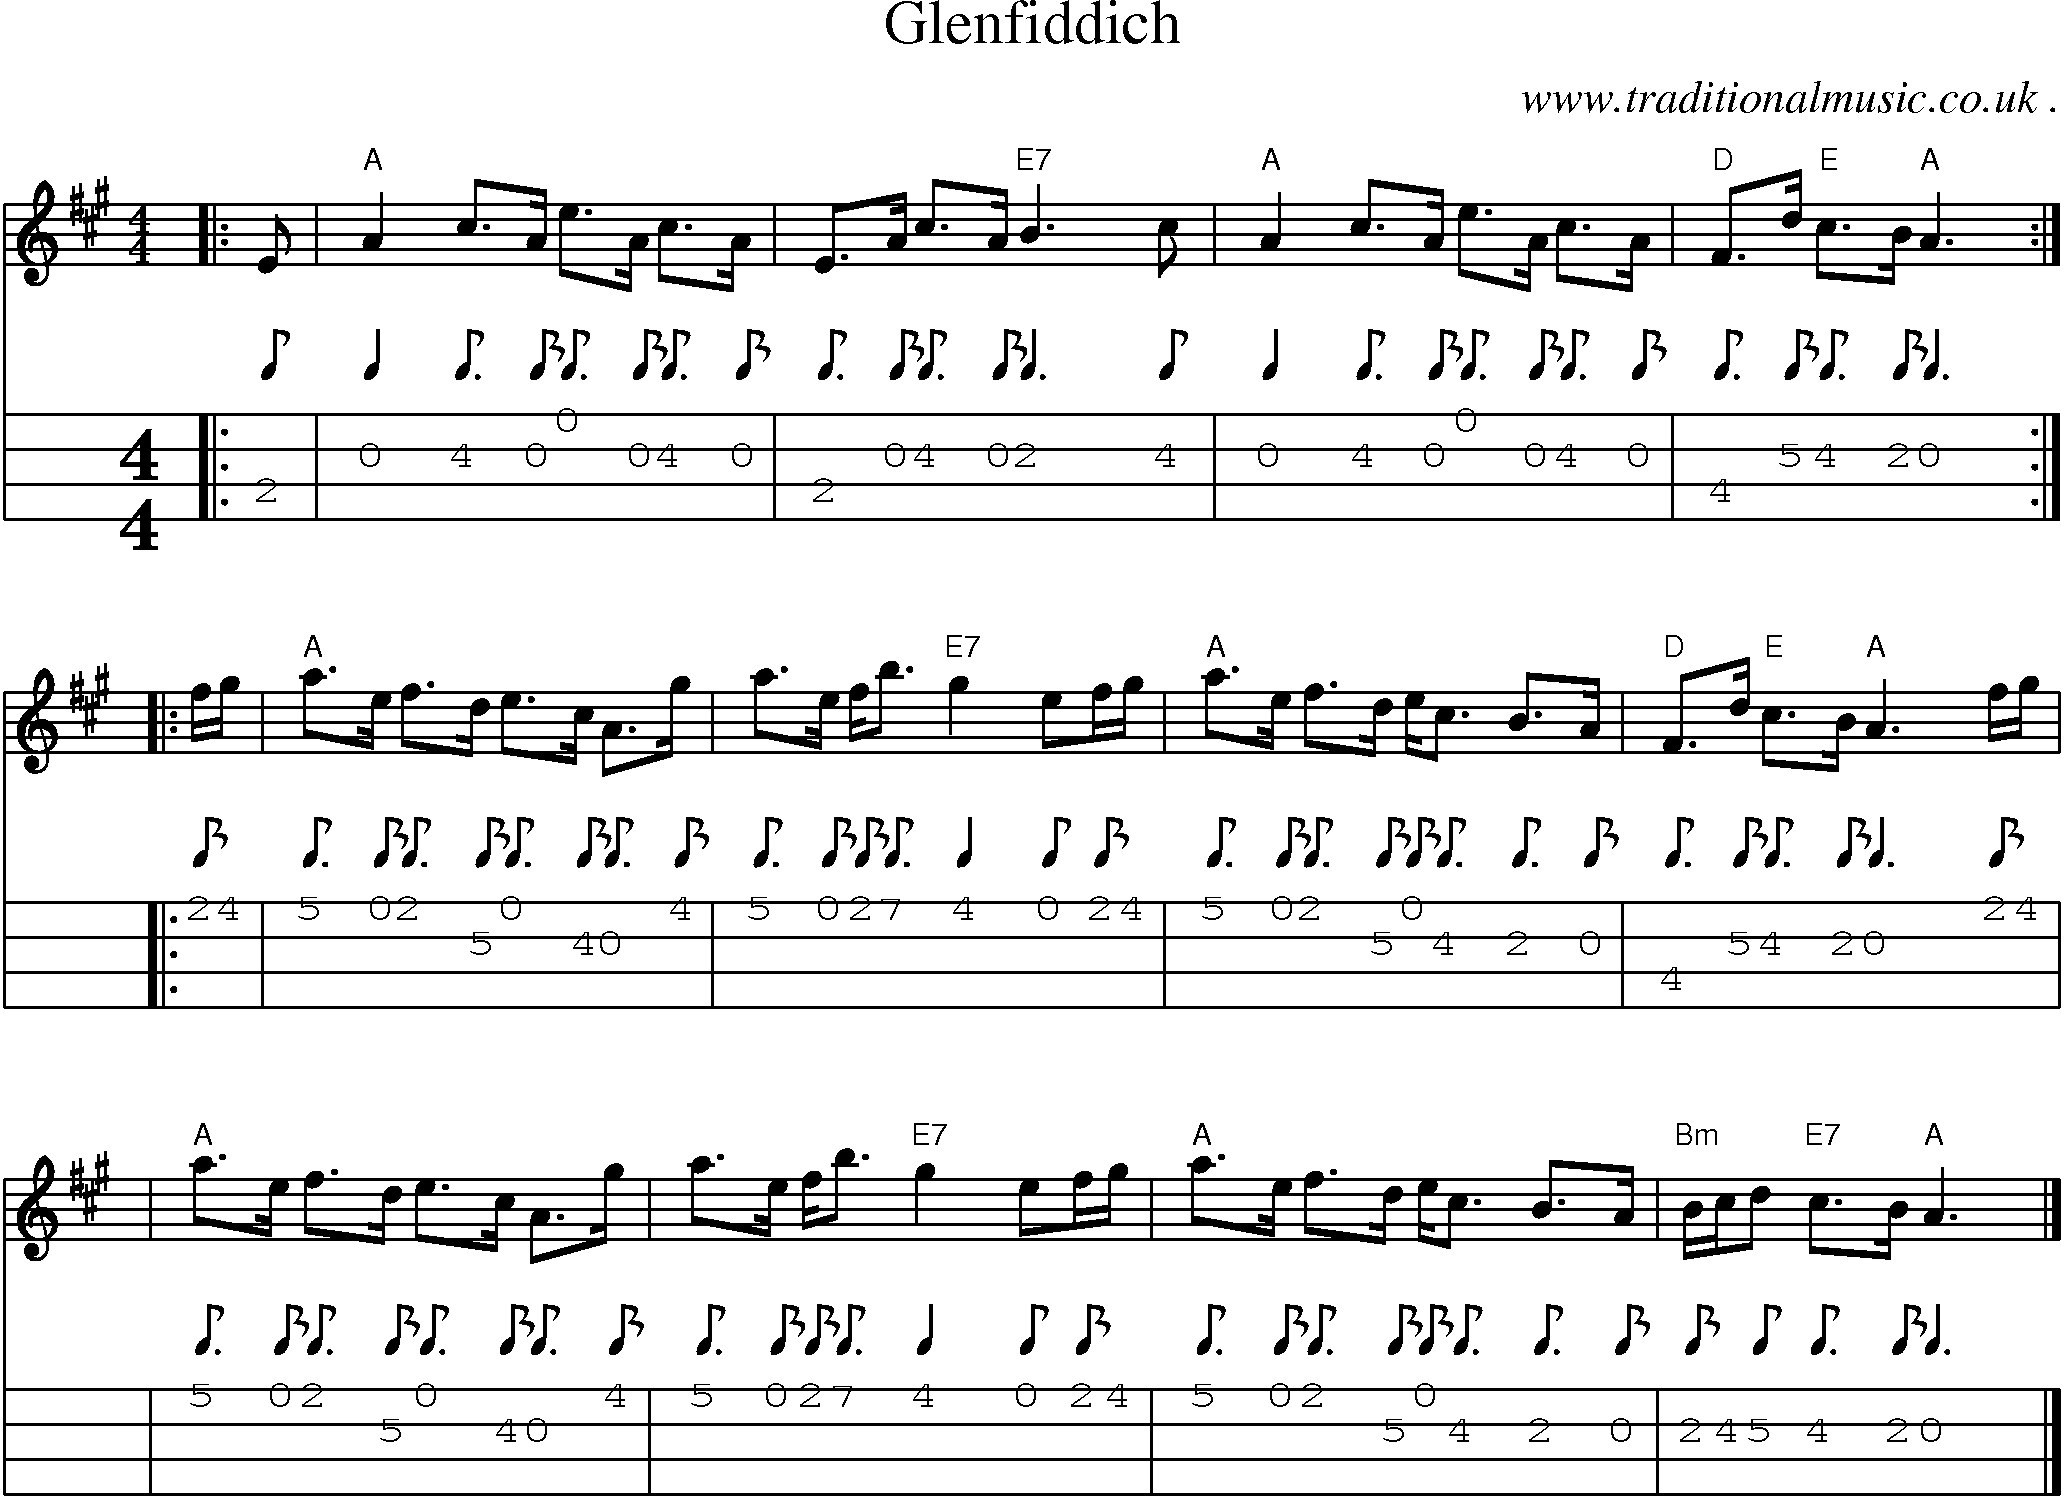 Sheet-music  score, Chords and Mandolin Tabs for Glenfiddich